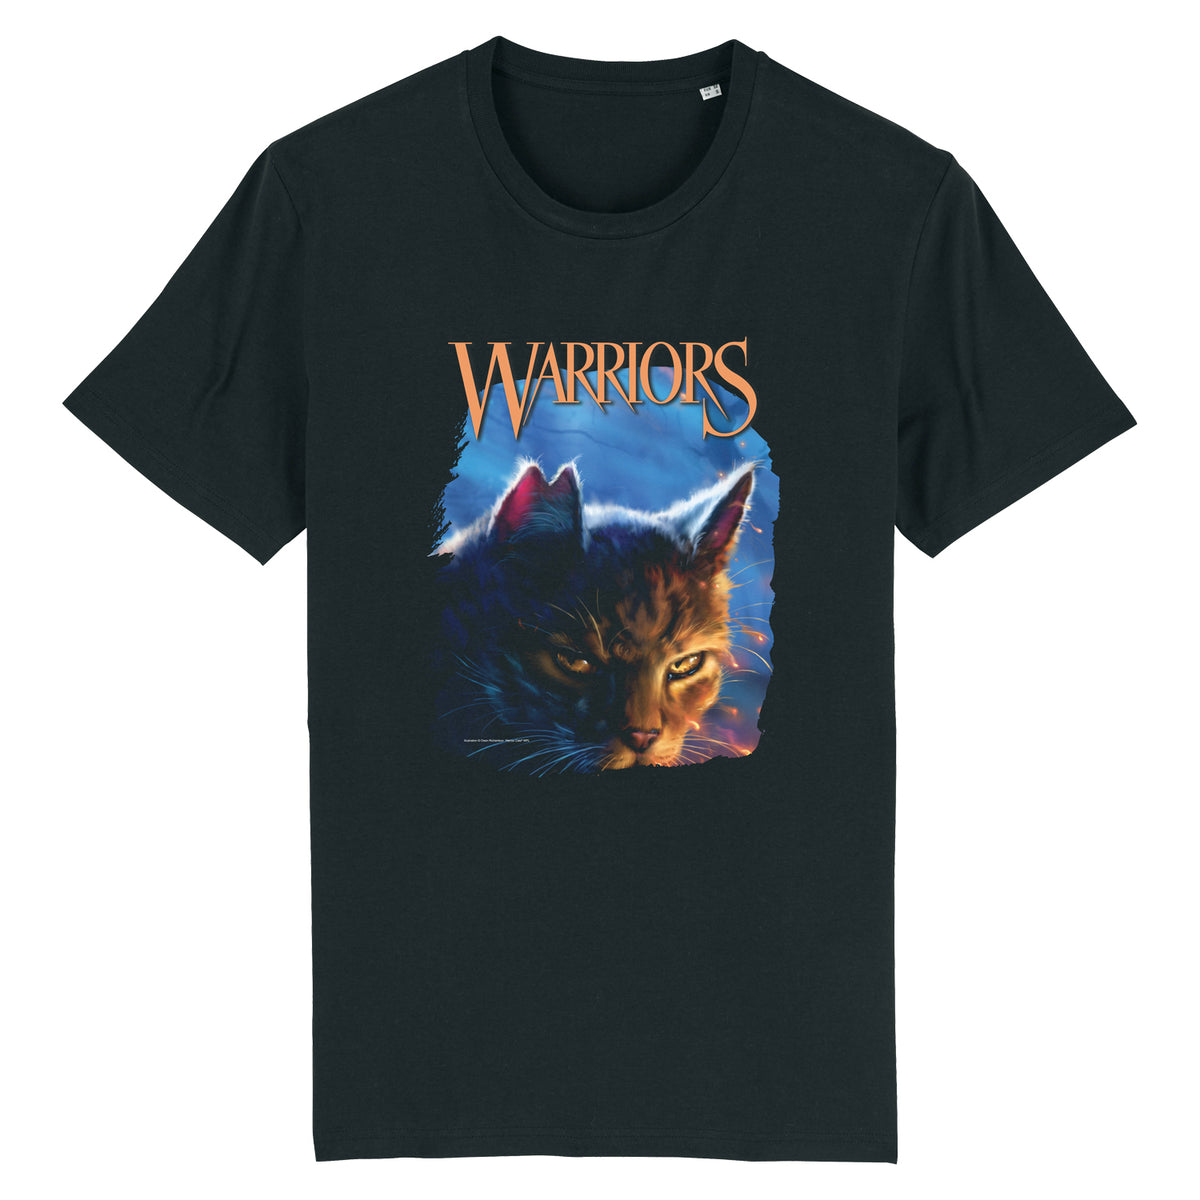 Fire And Ice - Adult Unisex T-Shirt